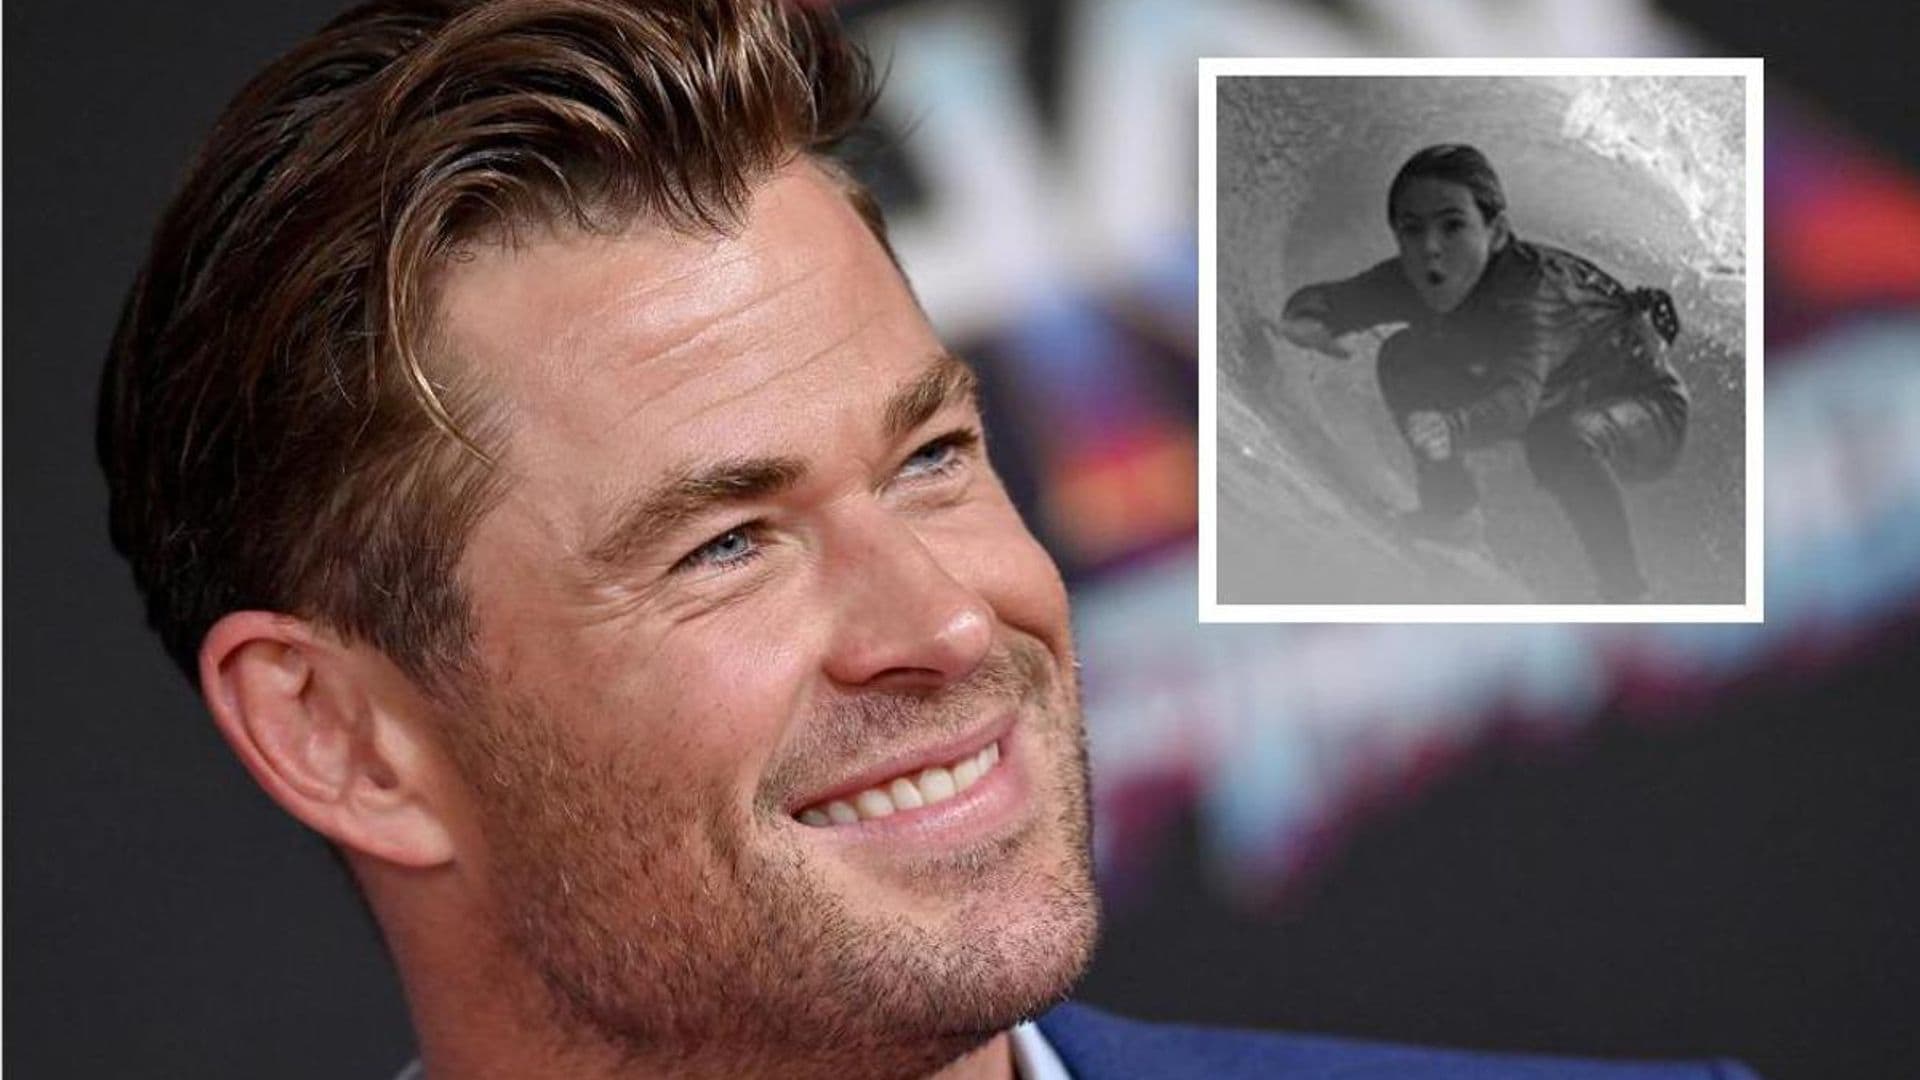 Chris Hemsworth proudly shows off his 8-year-old son’s impressive surfing skills